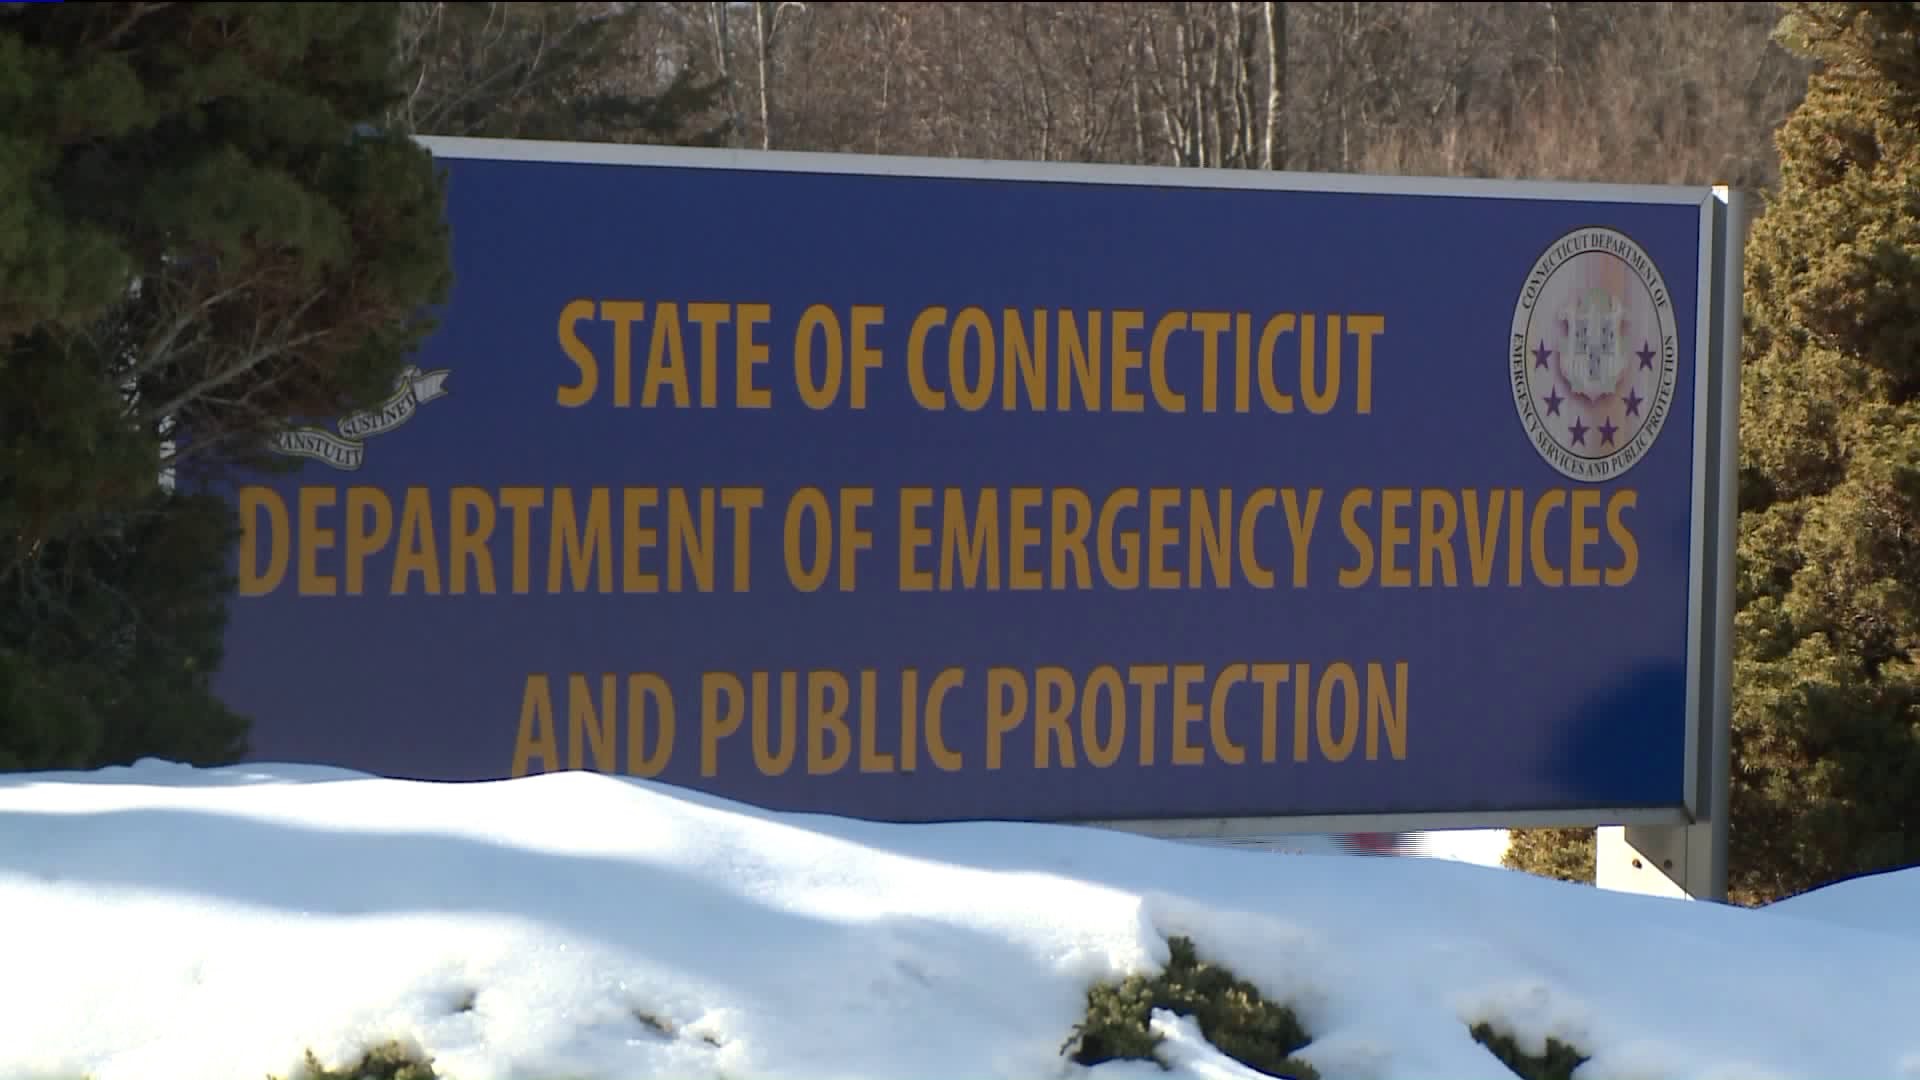 New wellness and resiliency program developed for department of Connecticut emergency service employees